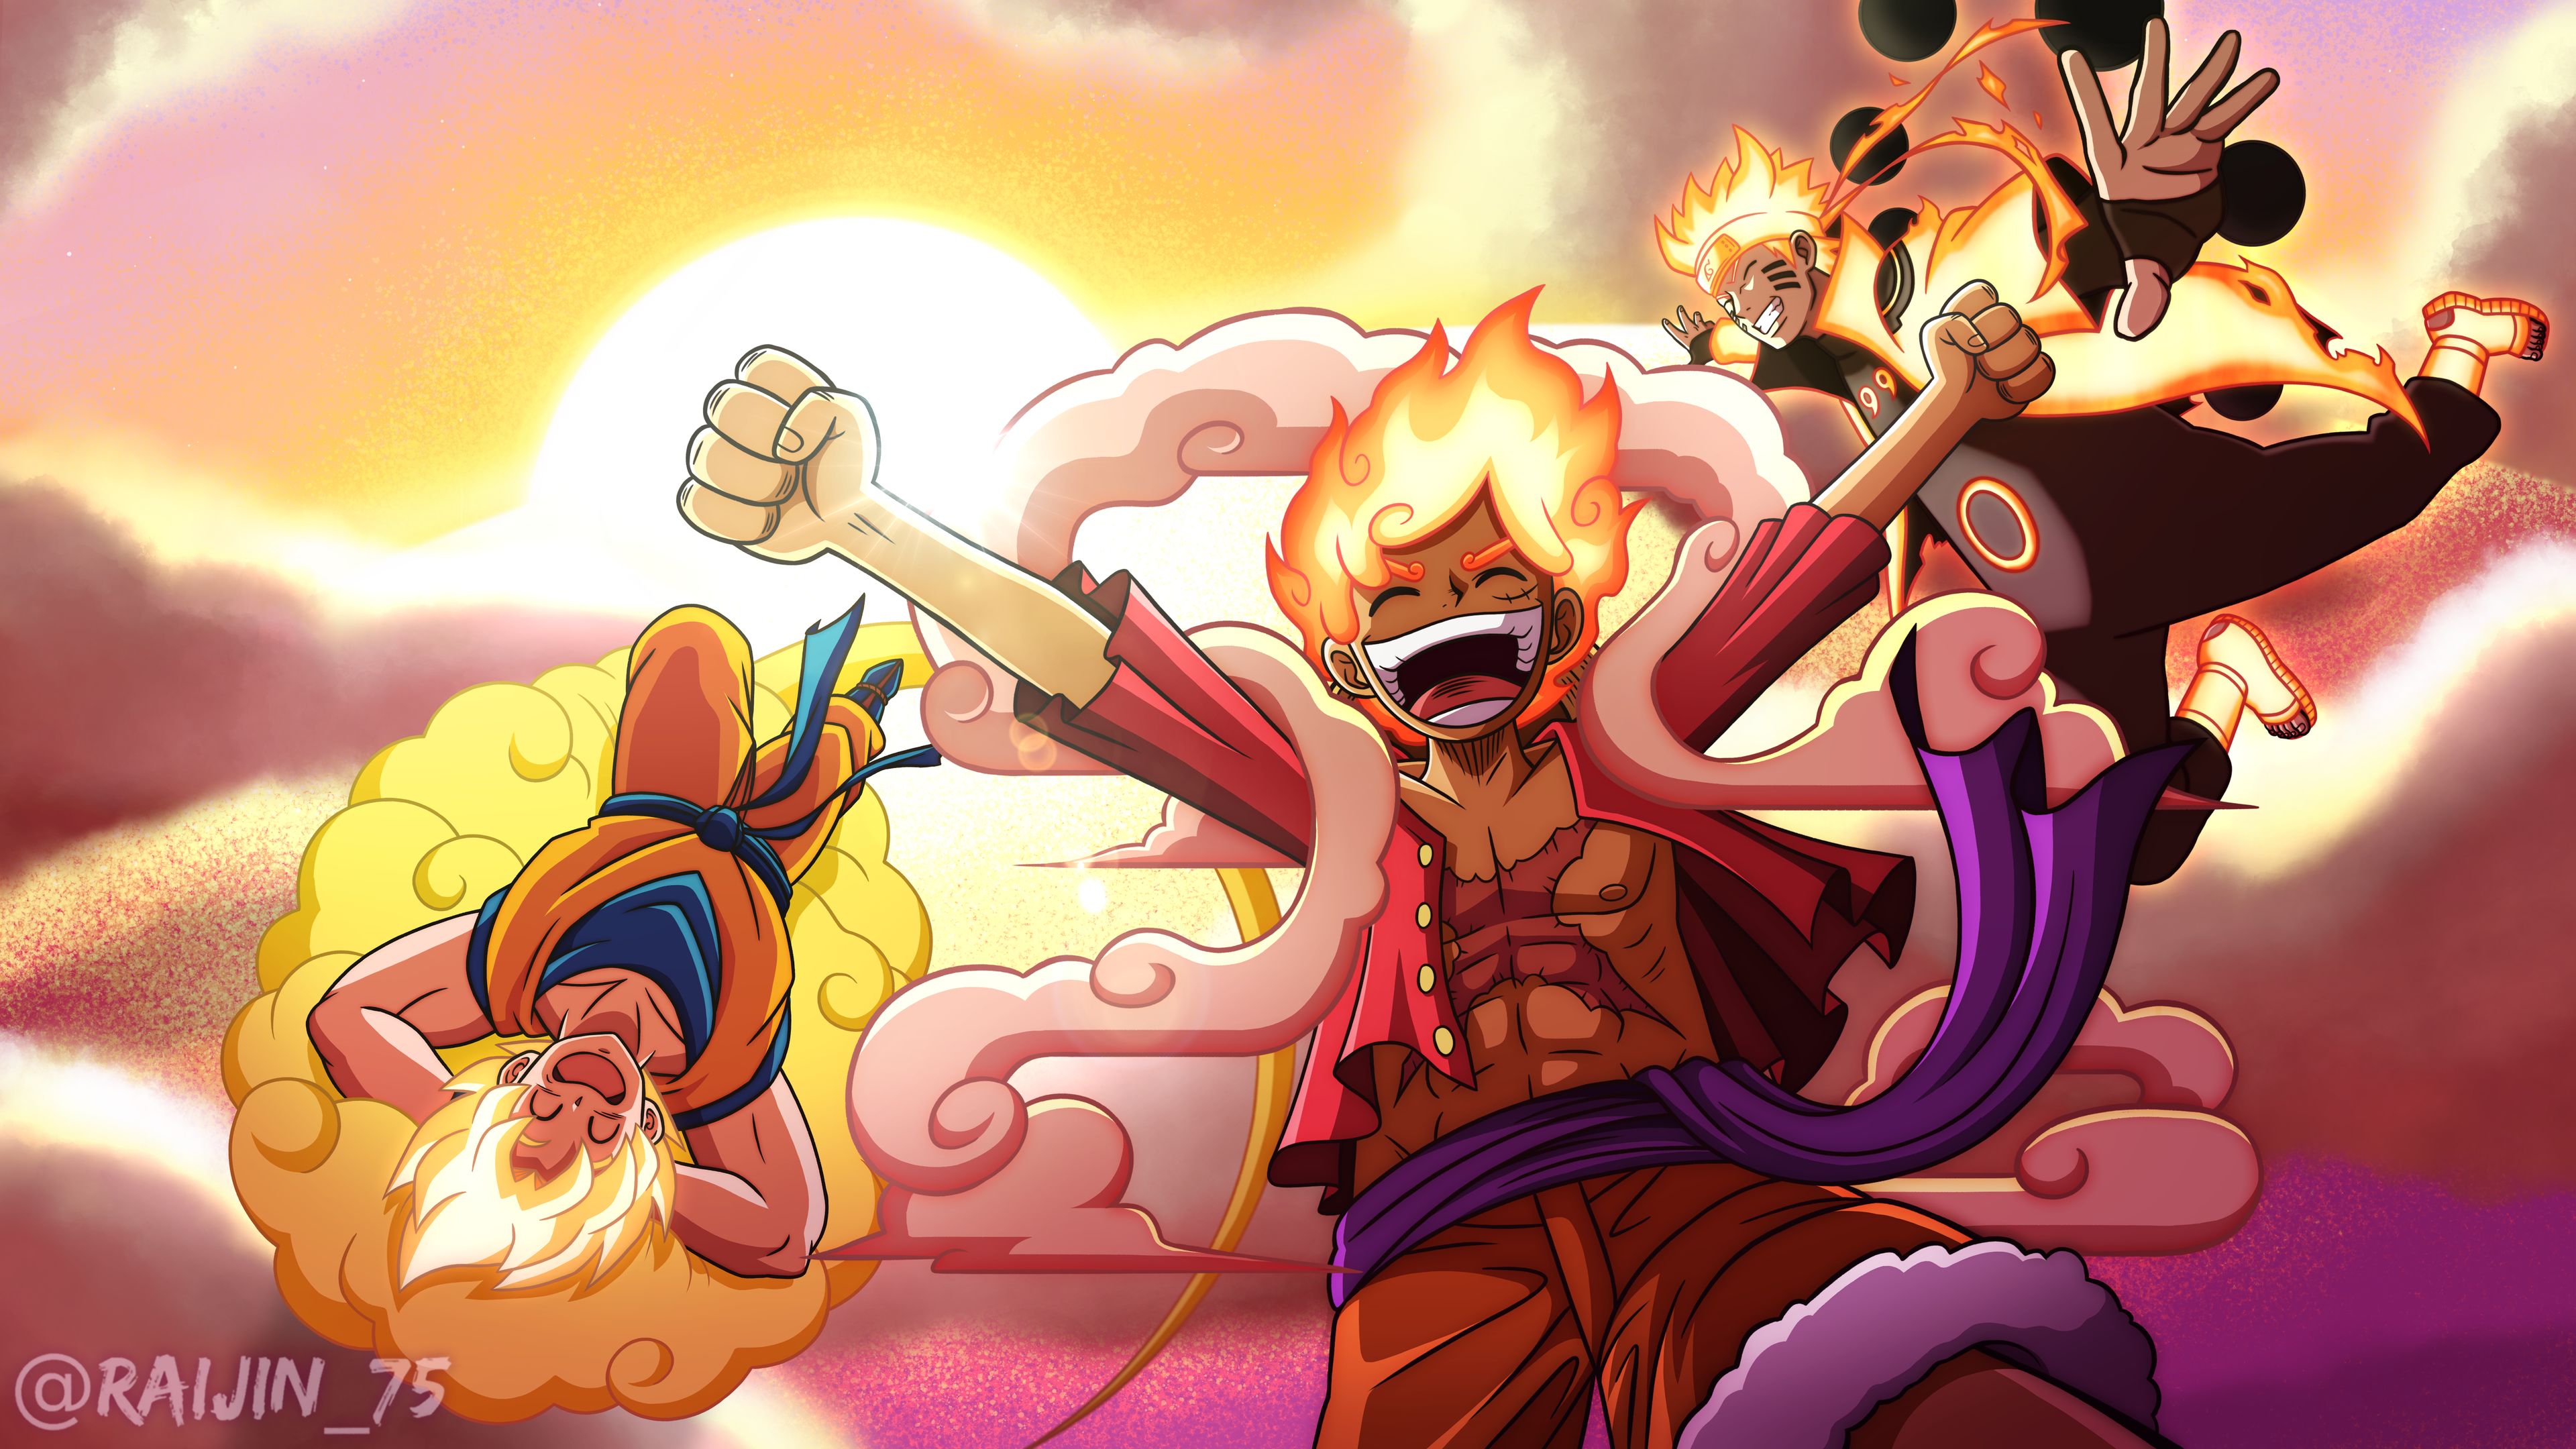 Download Gear 5 (One Piece) wallpaper for mobile phone, free Gear 5 (One Piece) HD picture